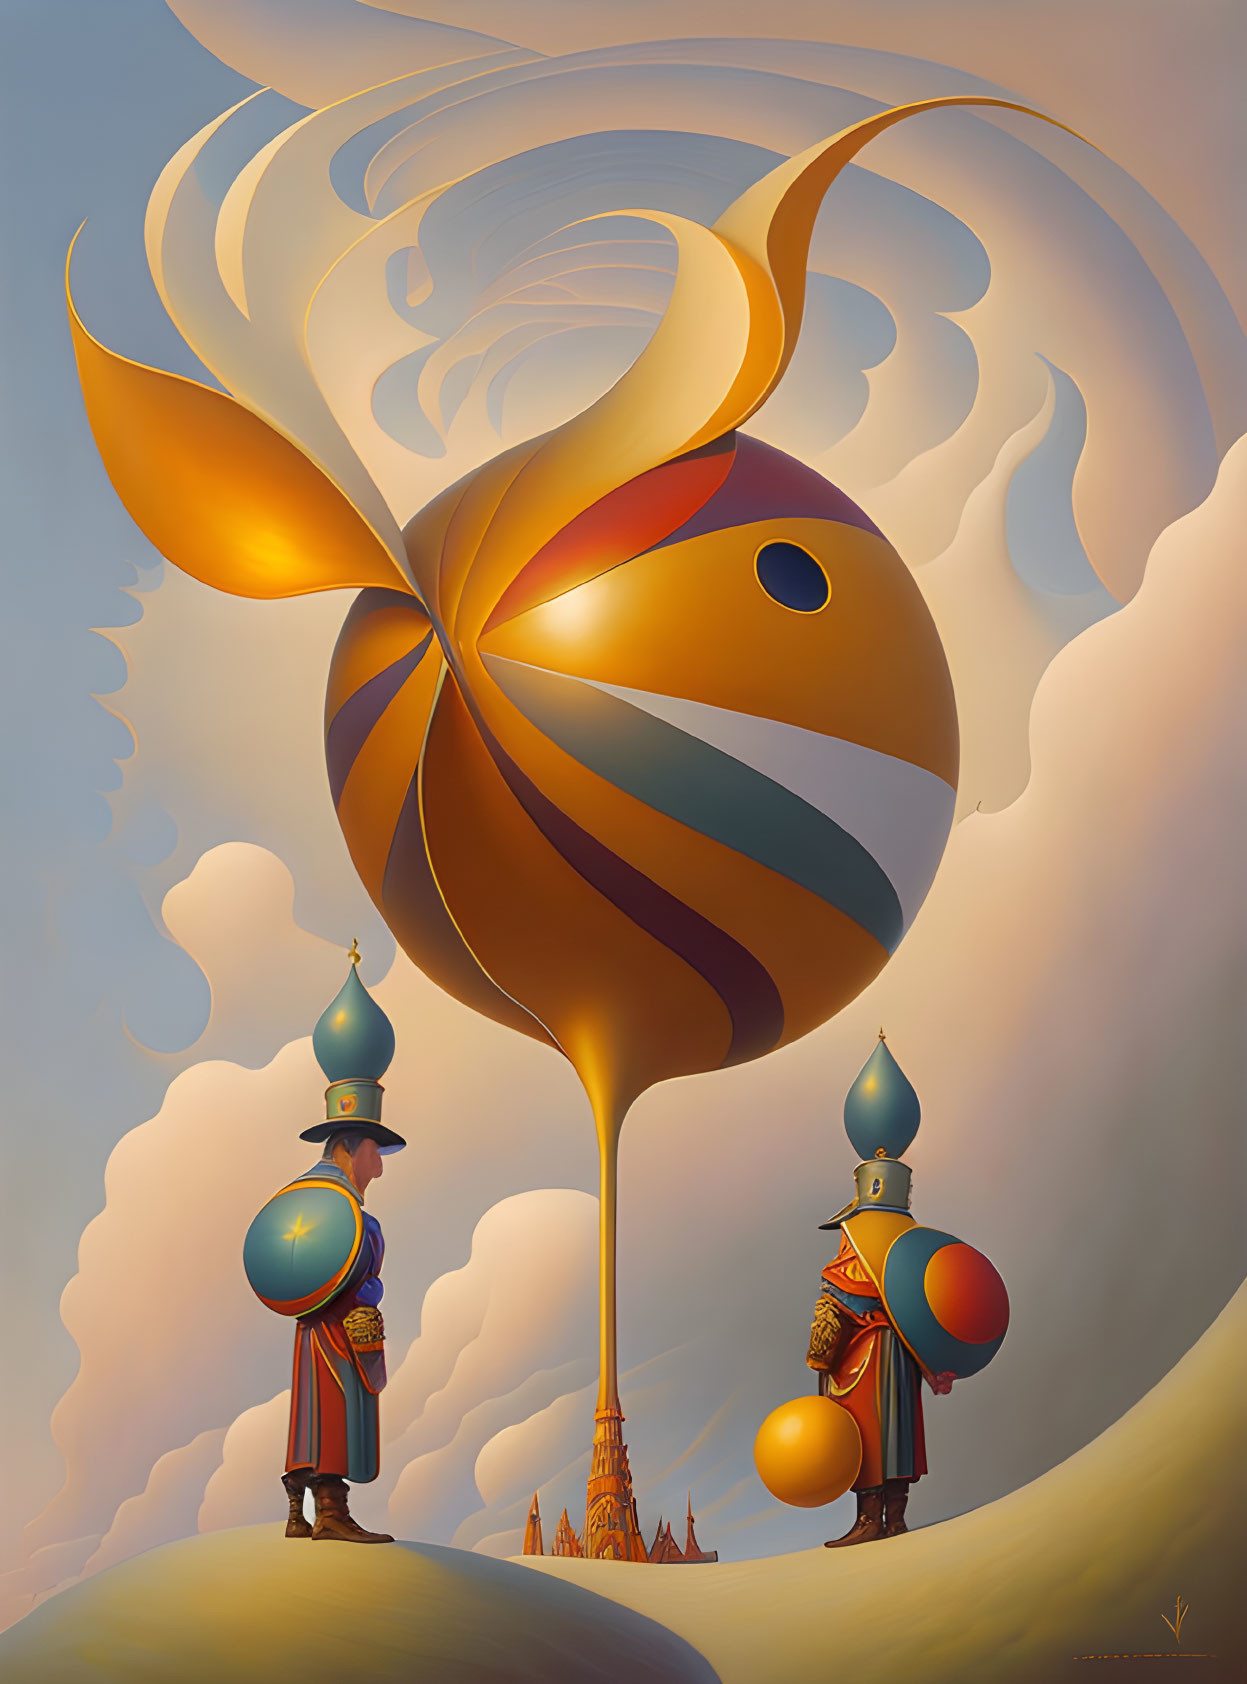 Uniformed figures with sphere helmets by whimsical tree and yin-yang symbol under surreal sky